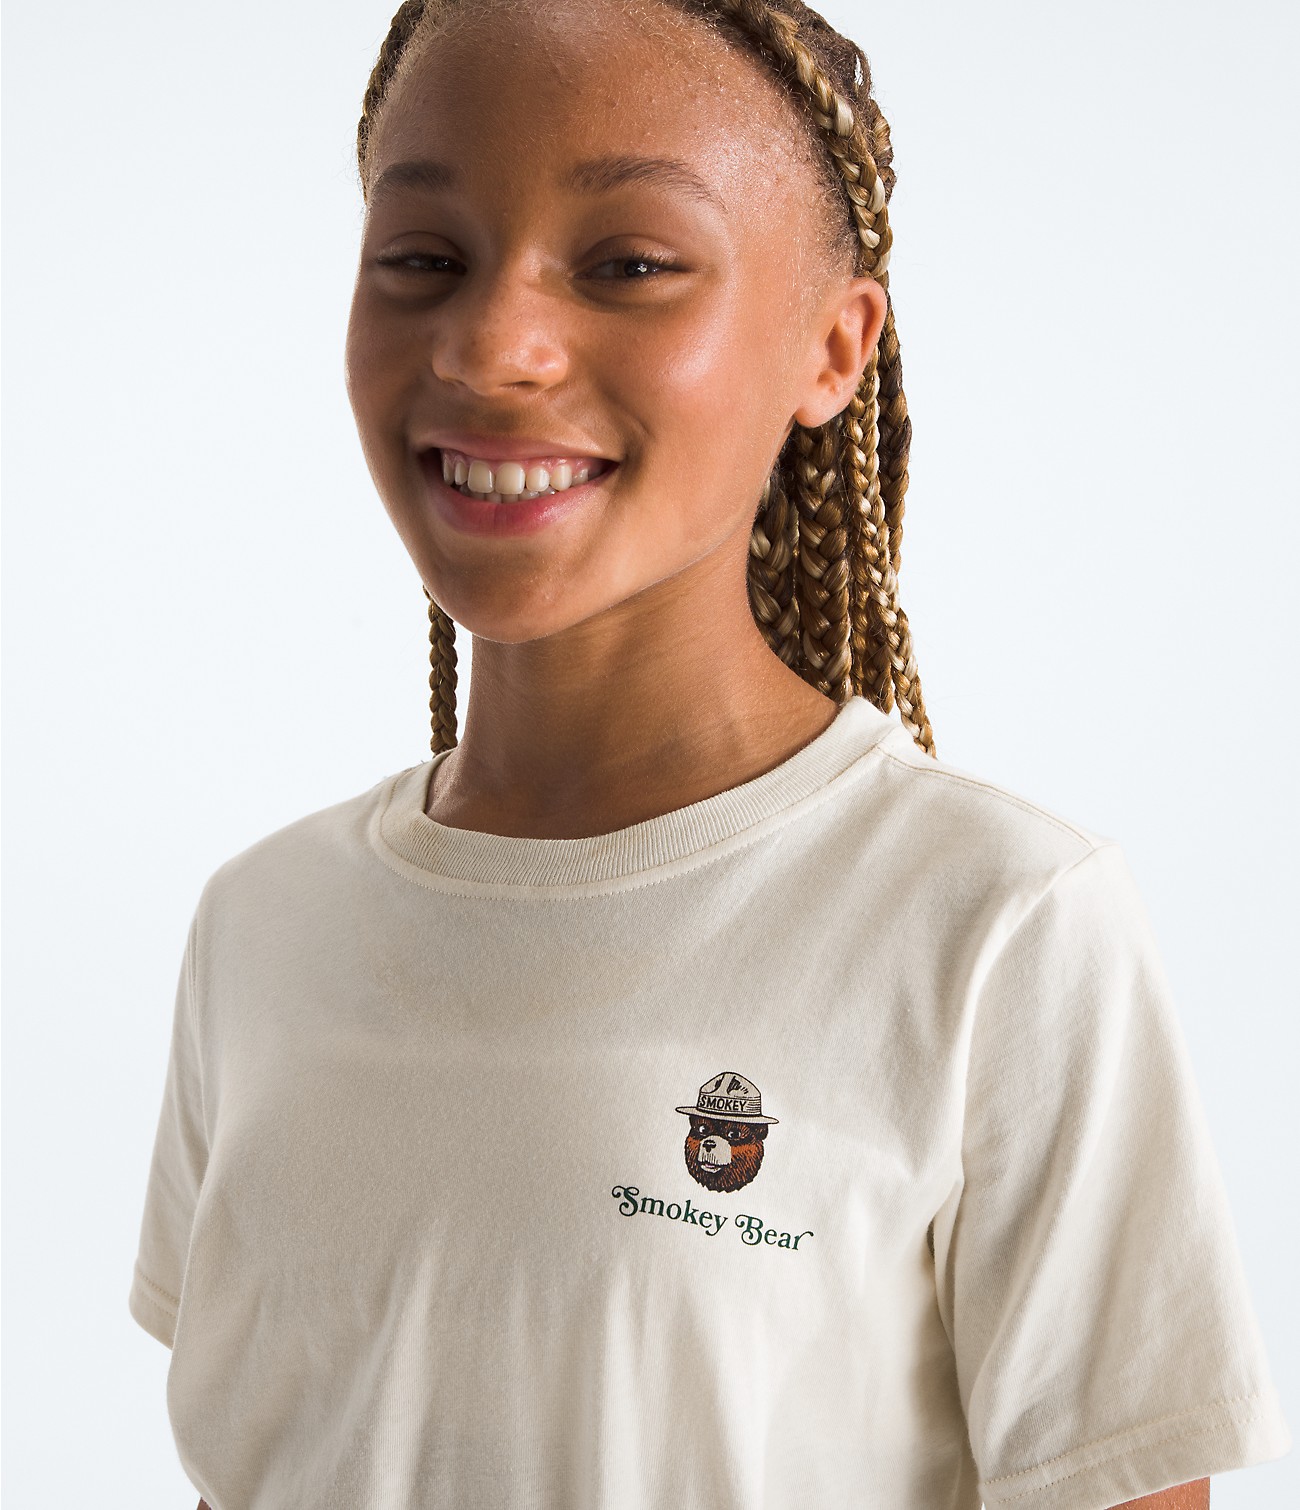 Girls’ Short-Sleeve Graphic Tee | The North Face